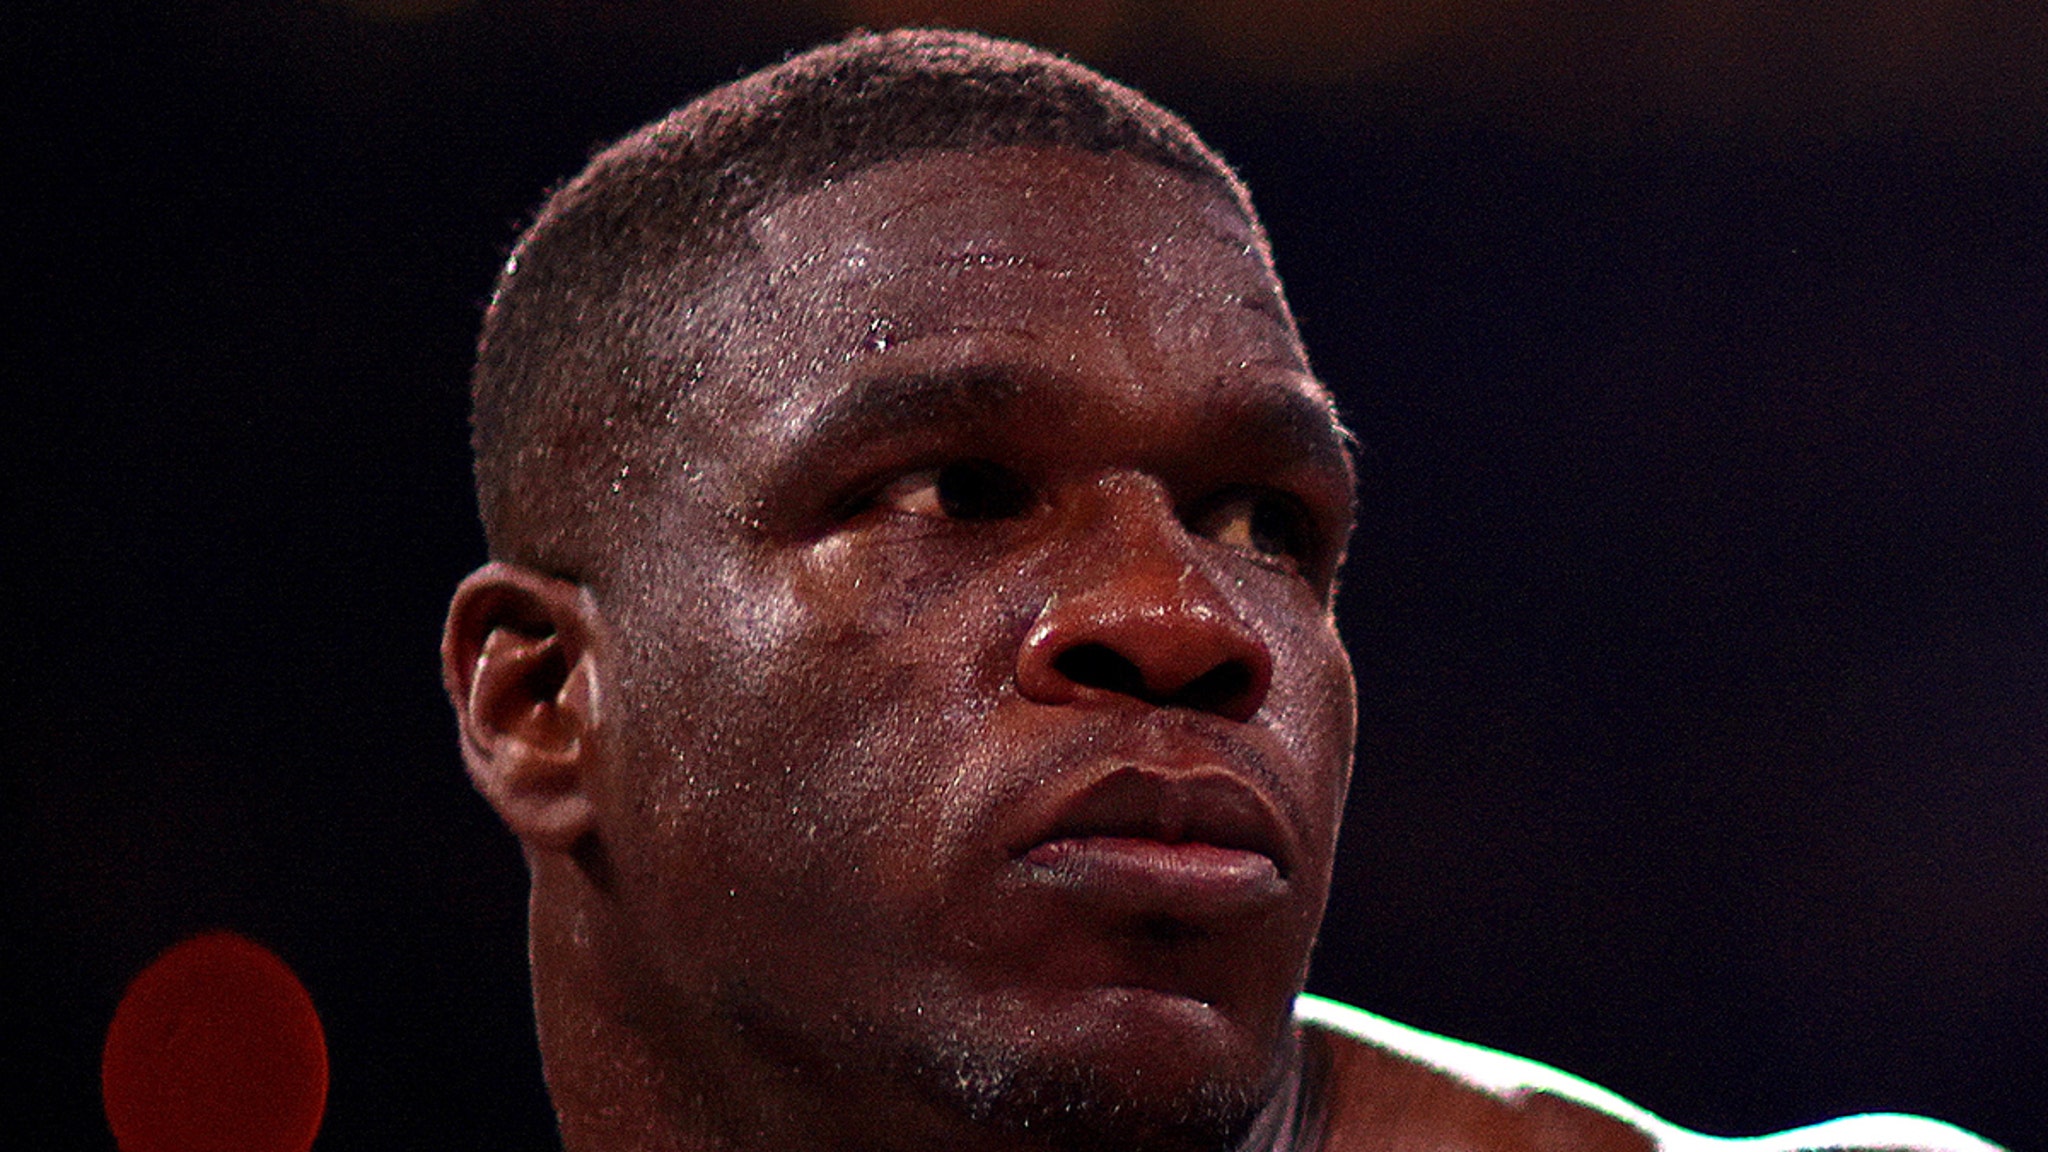 Frank Gore Allegedly Concerned In Dom. Violence Incident, Charged W/ Easy Attack